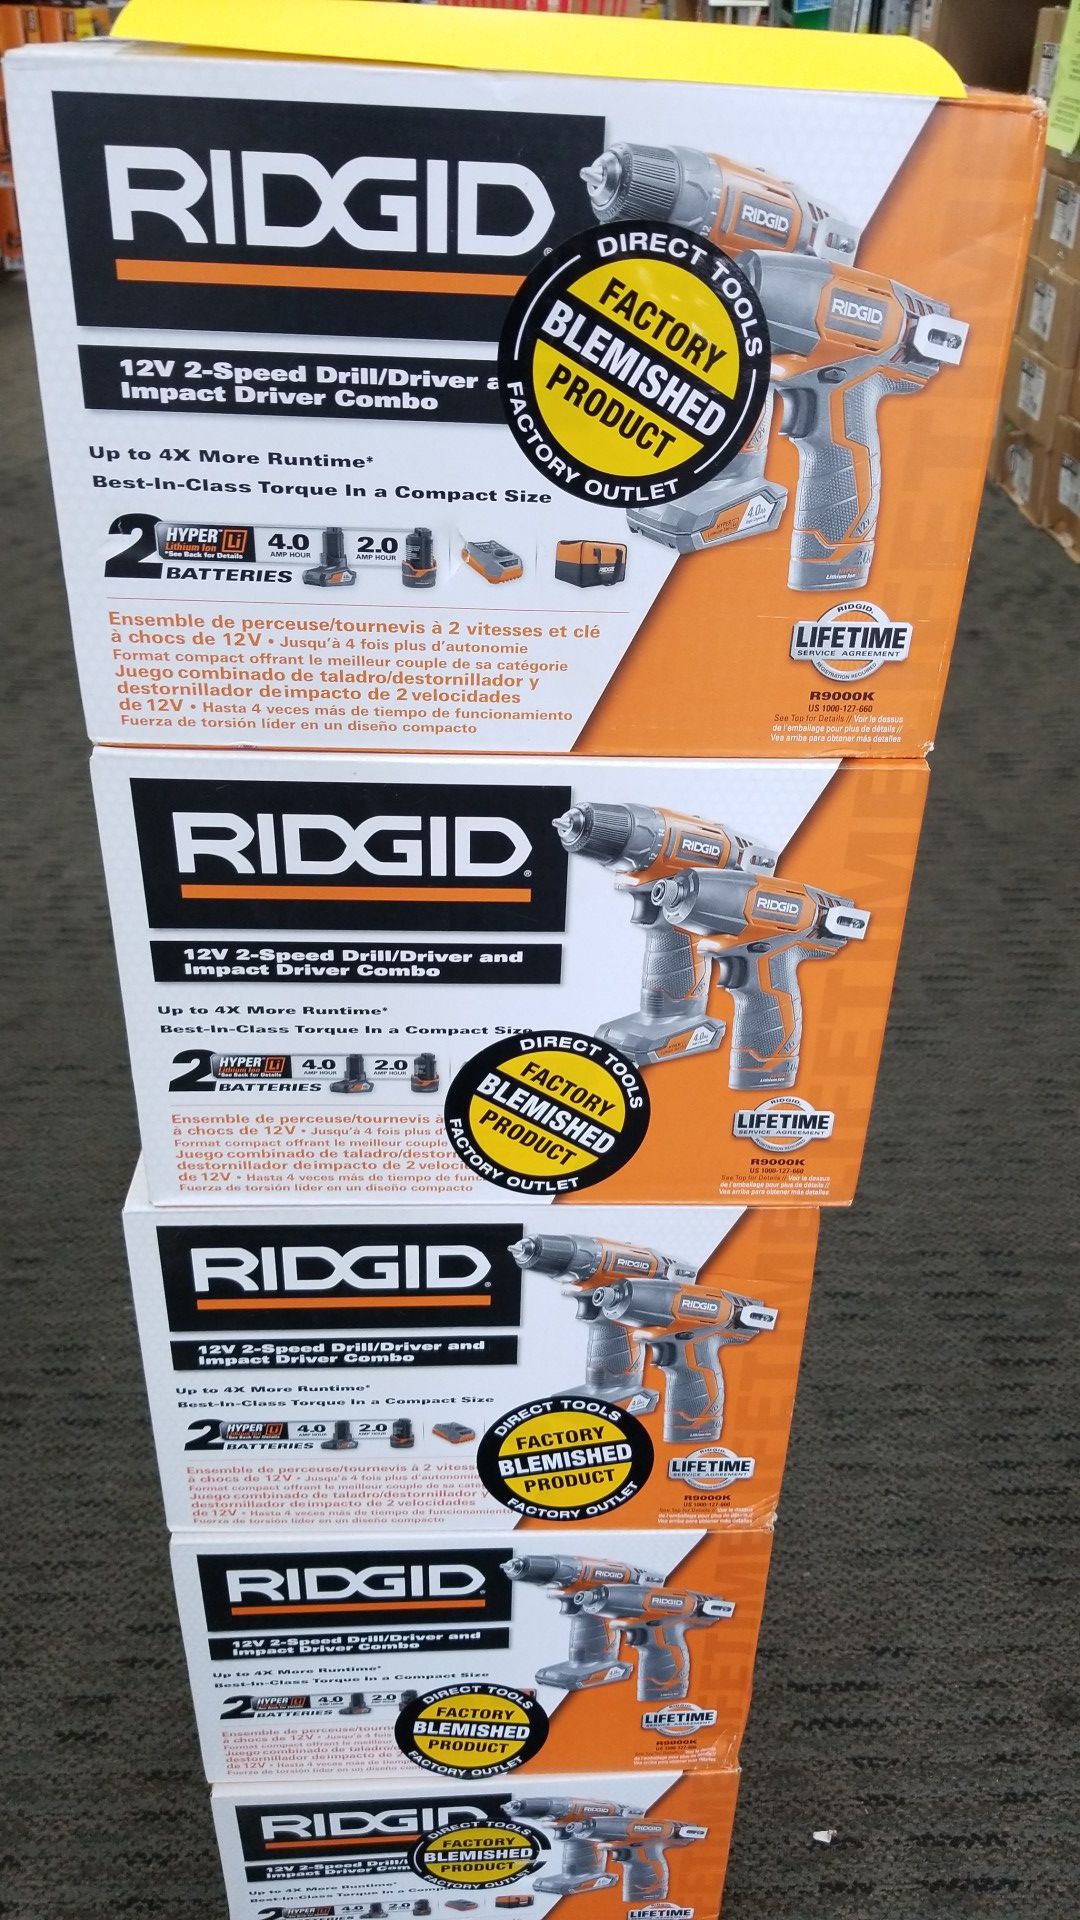 Ridgid 12v drill/impact kit (2 batteries and charger)